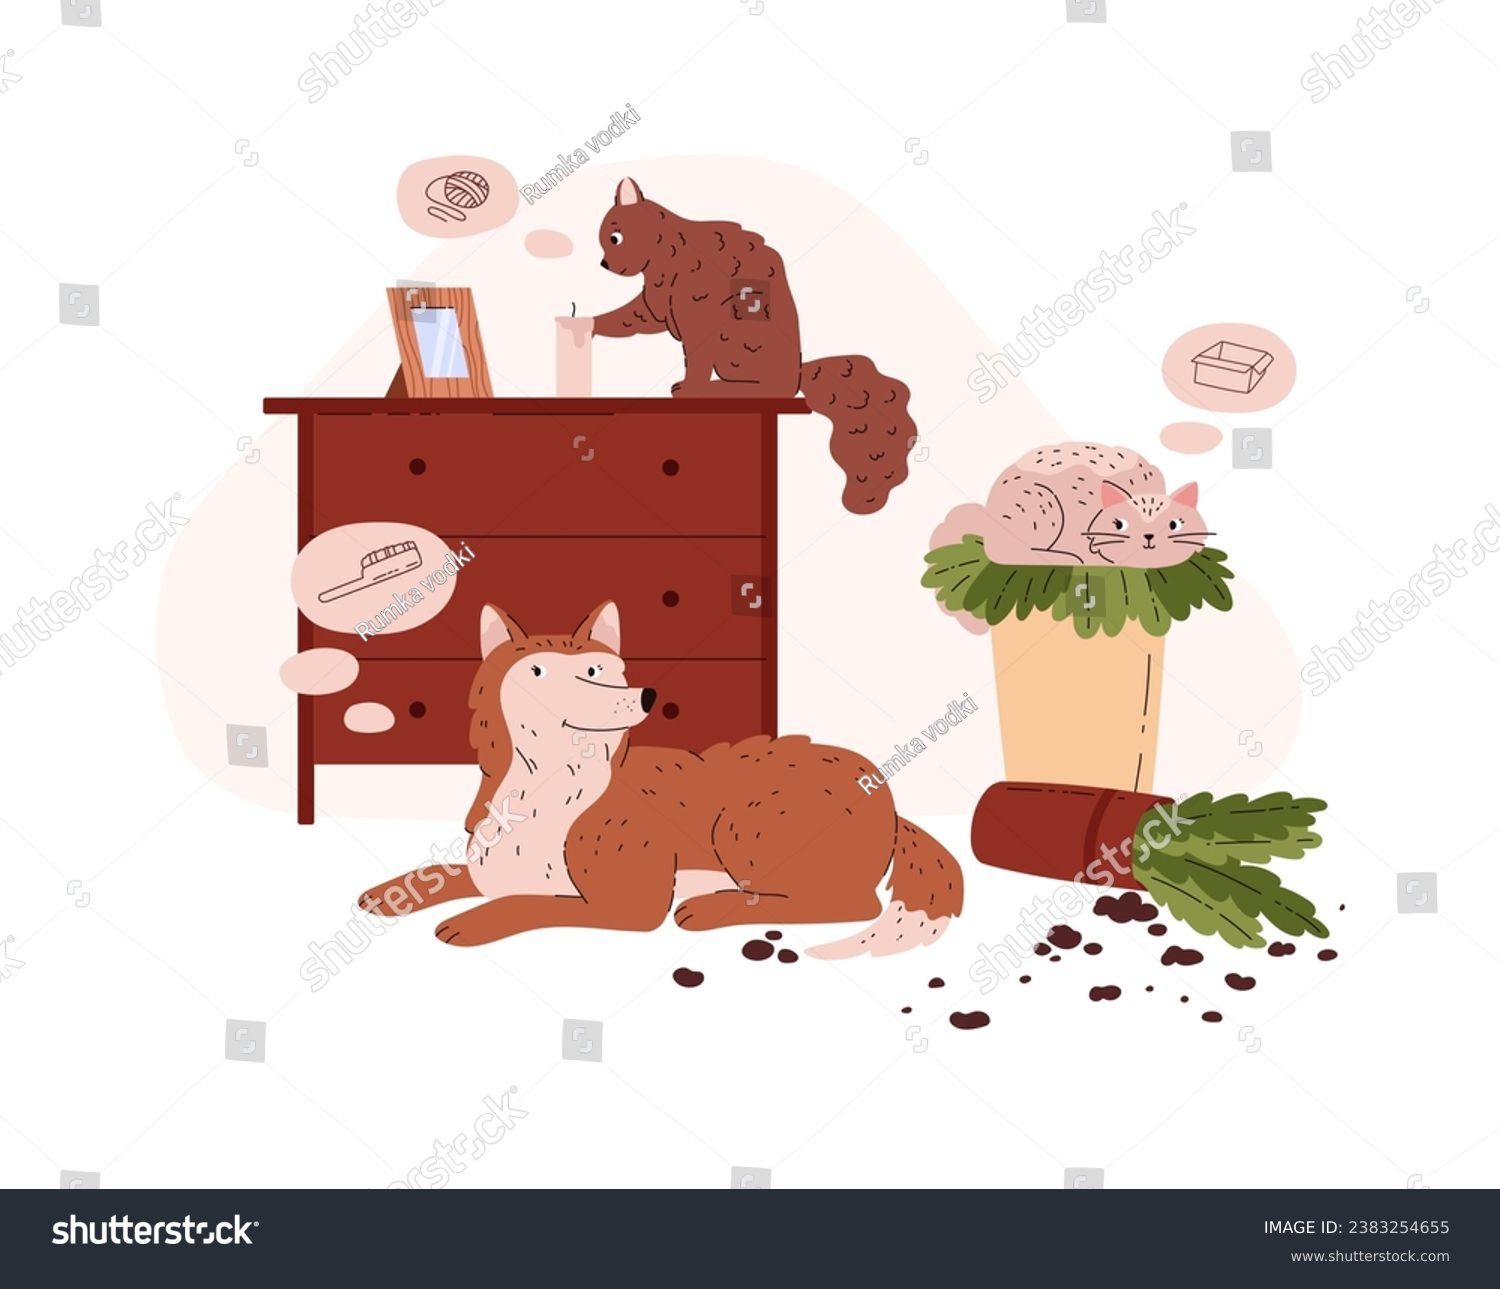 SVG of Cute pets with clouds of thoughts in room flat style, vector illustration isolated on white background. Decorative design element, naughty characters, broken houseplant svg